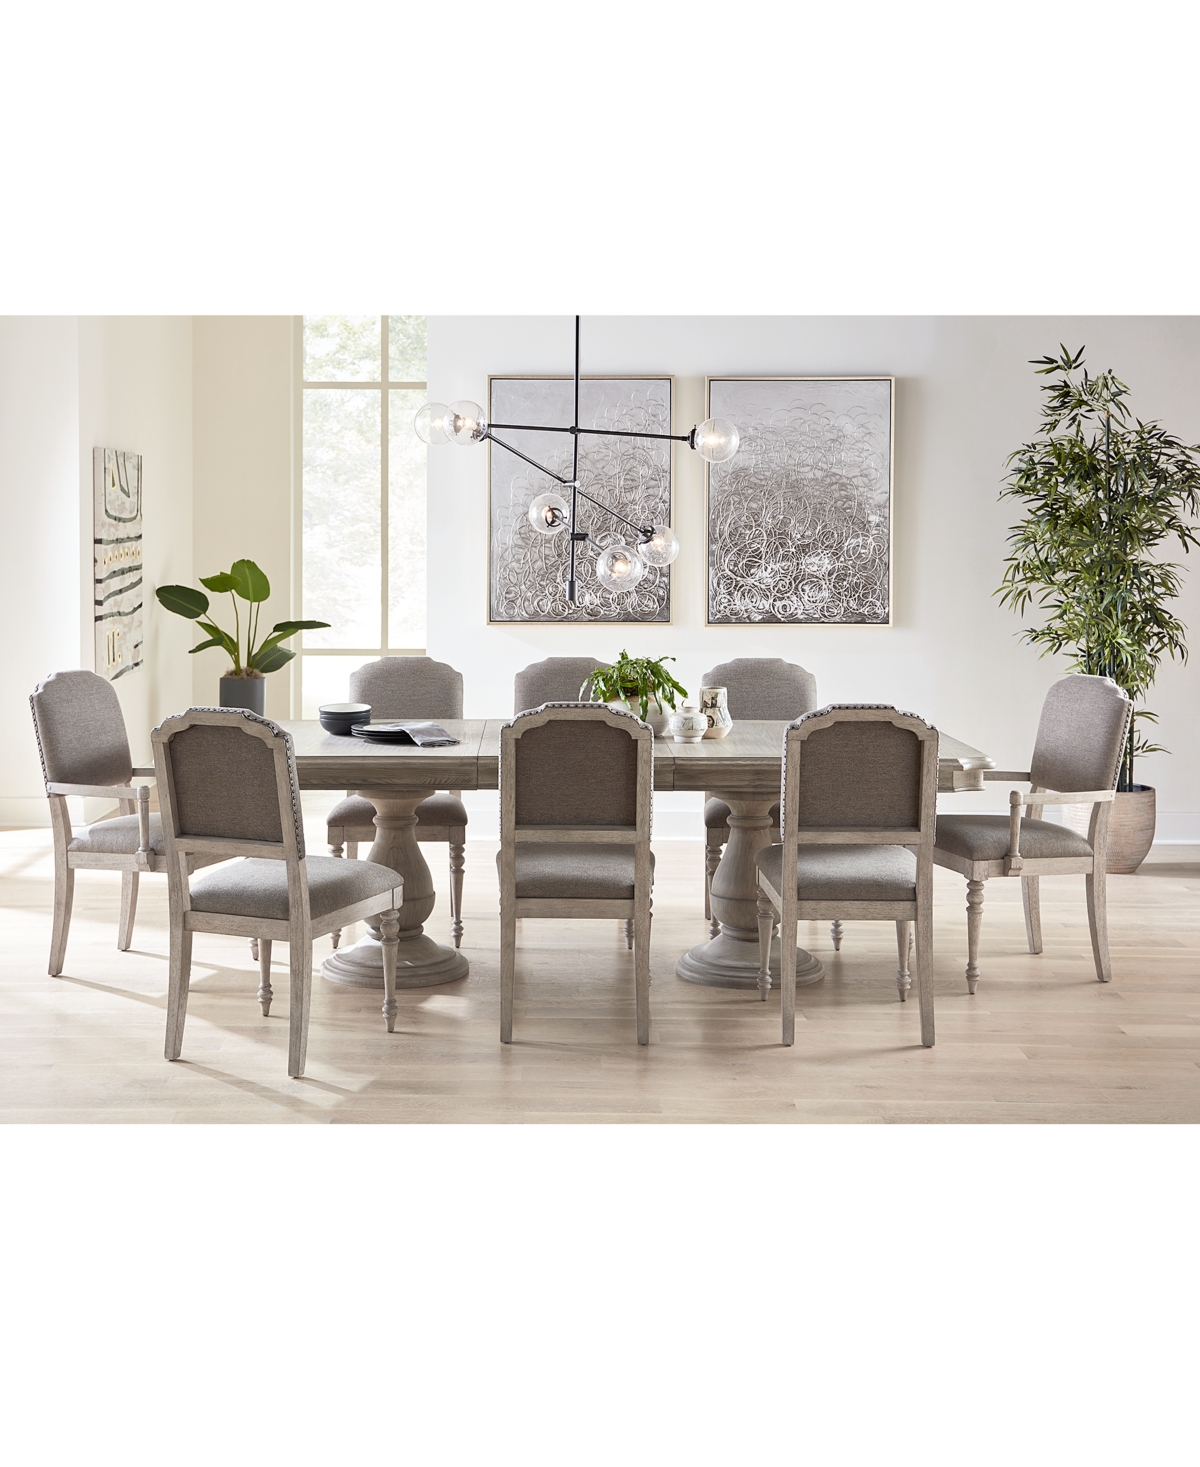 Furniture Anniston Dining 9-pc. Set (rectangular Table, 6 Side Chairs, 2 Arm Chairs)